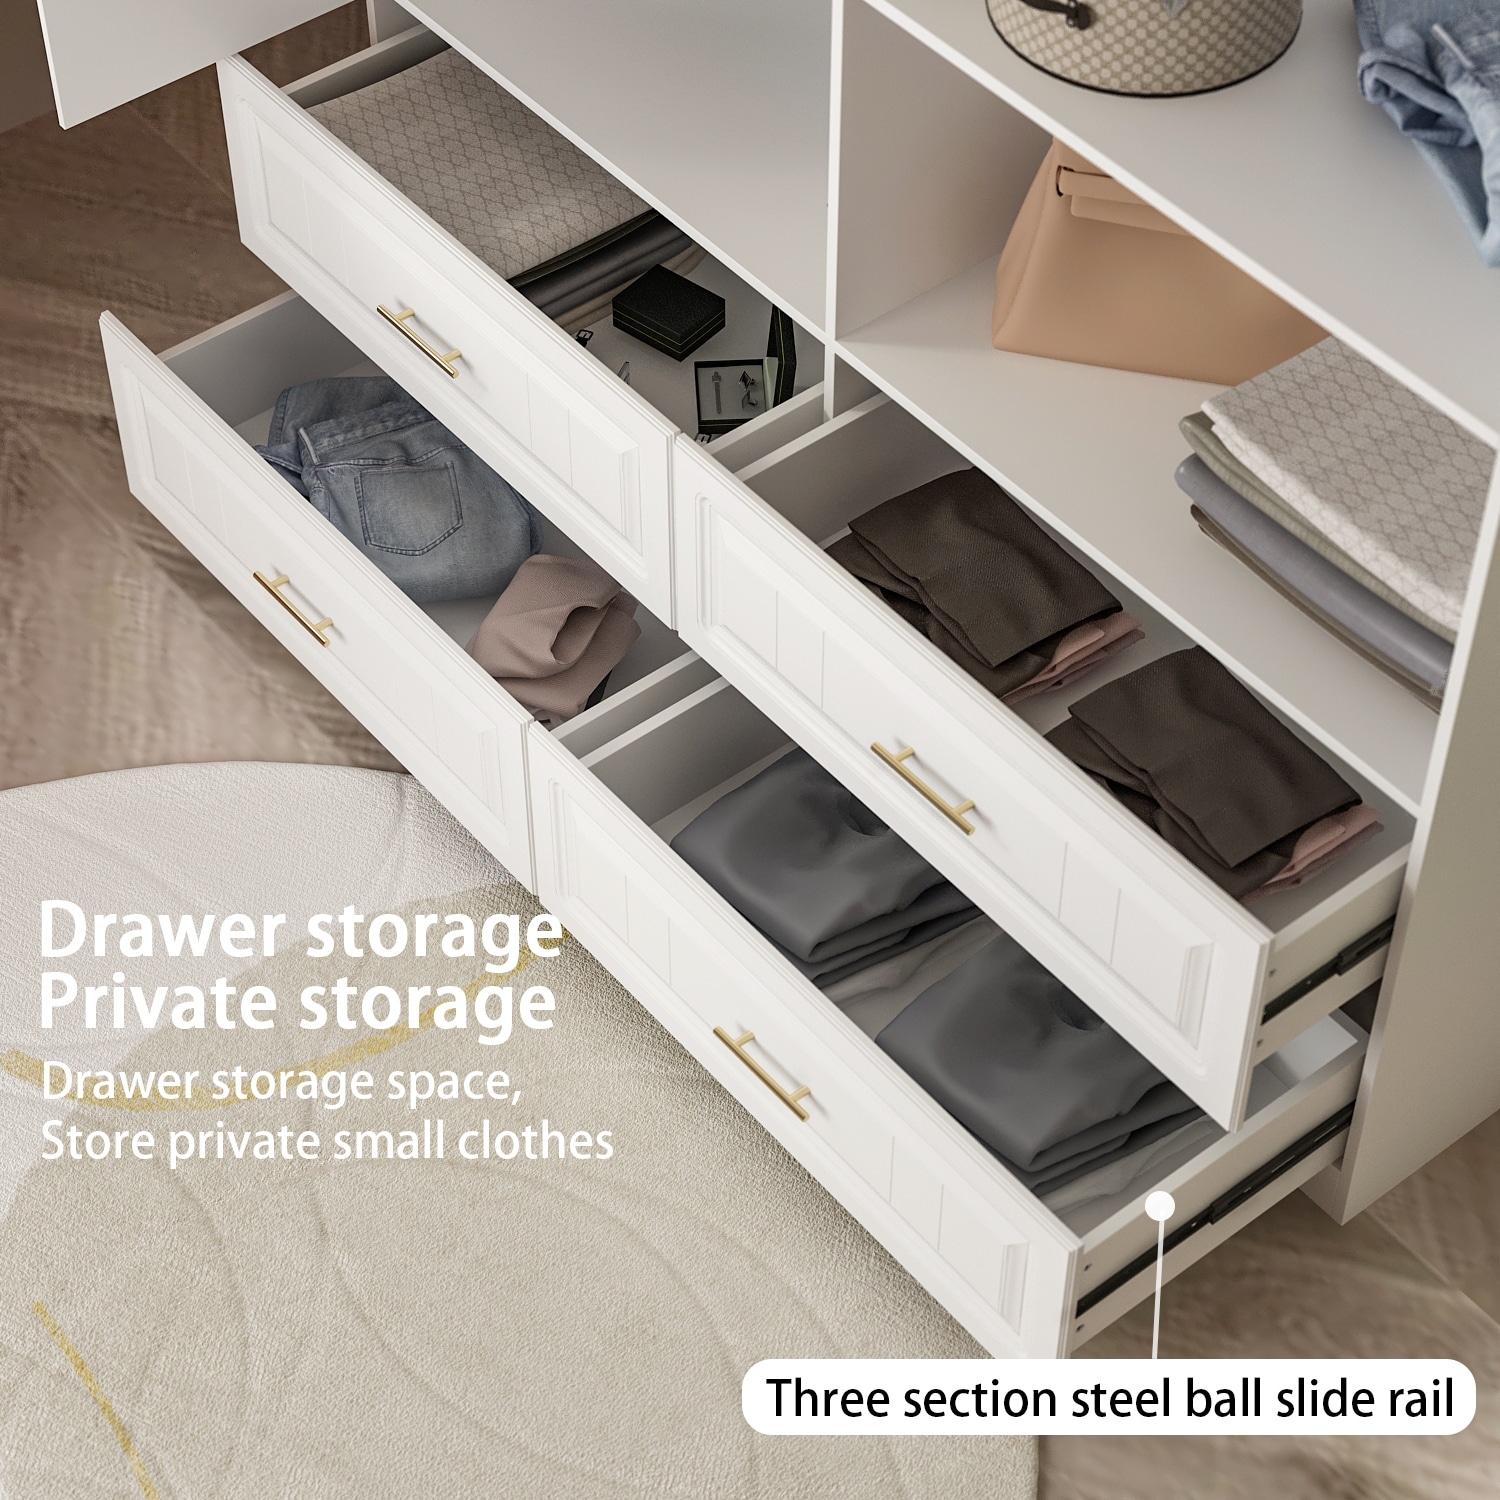 https://ak1.ostkcdn.com/images/products/is/images/direct/1ac654799a19d0140bbfa04d591fac6e393a5ead/93.9%22H-Armoires-Wardrobes-Closet-Cabinet-With-Hanging-4-Drawer-Storage.jpg